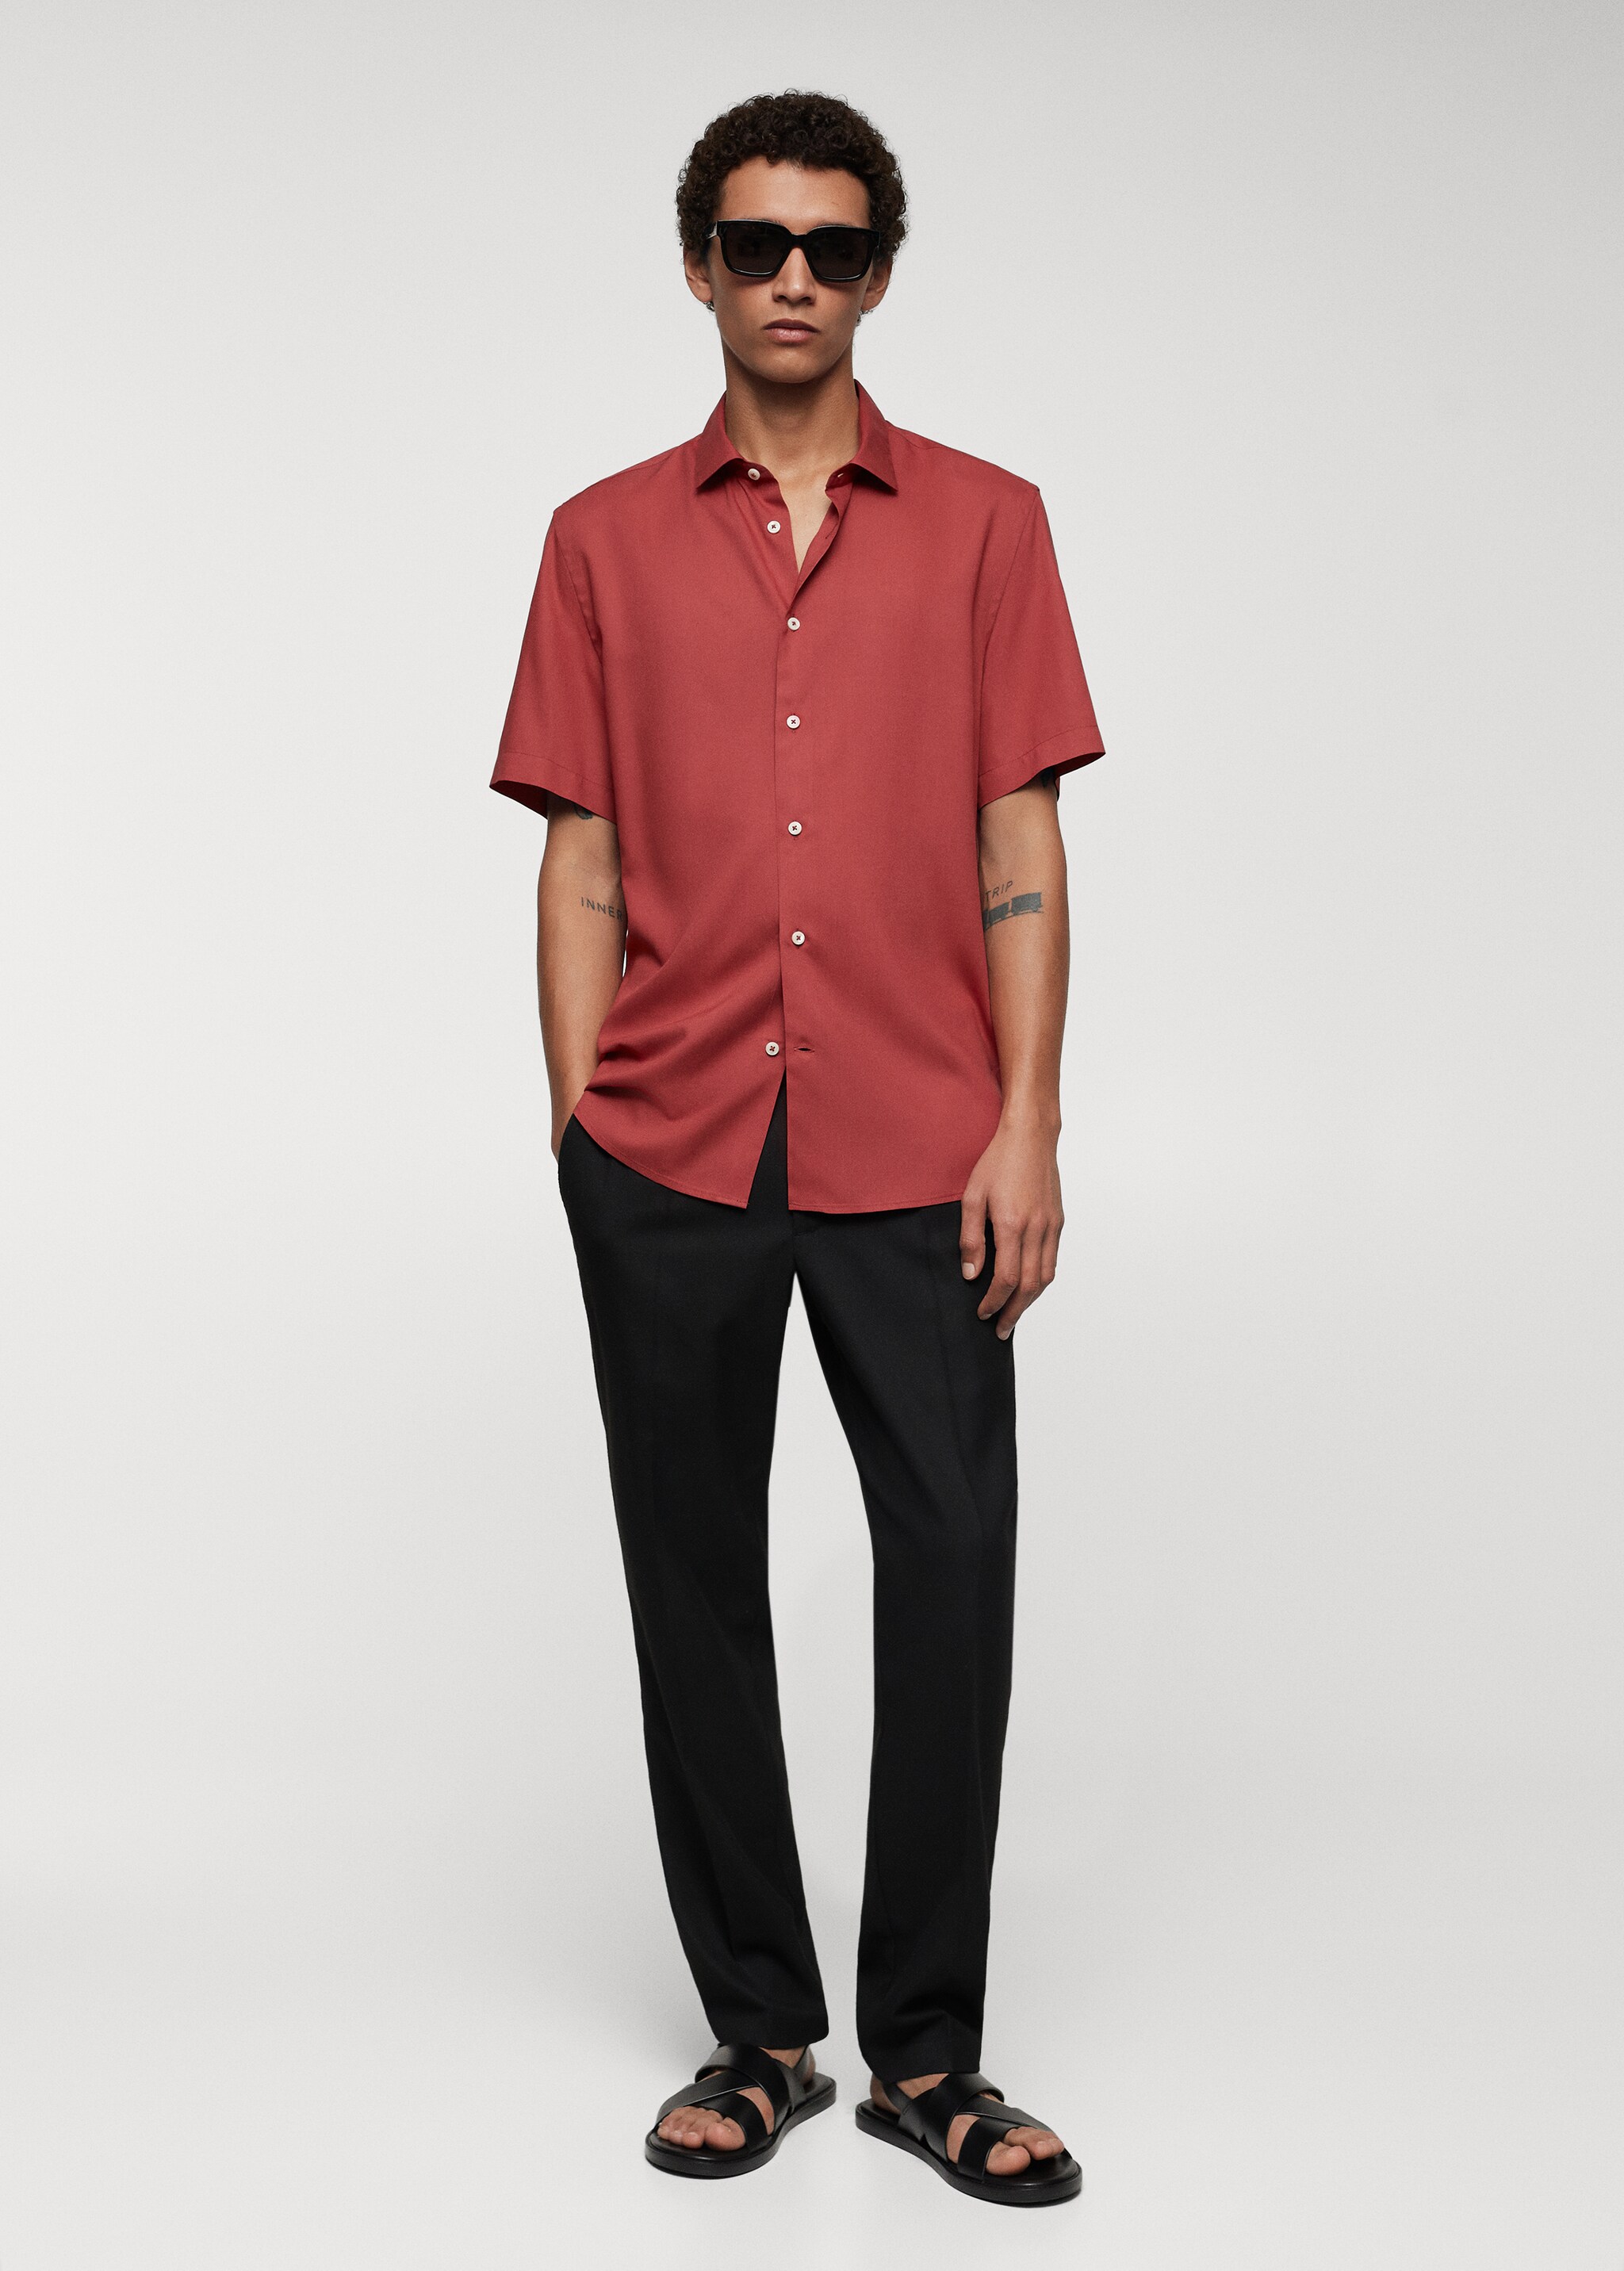 Classic-fit short sleeved shirt - General plane